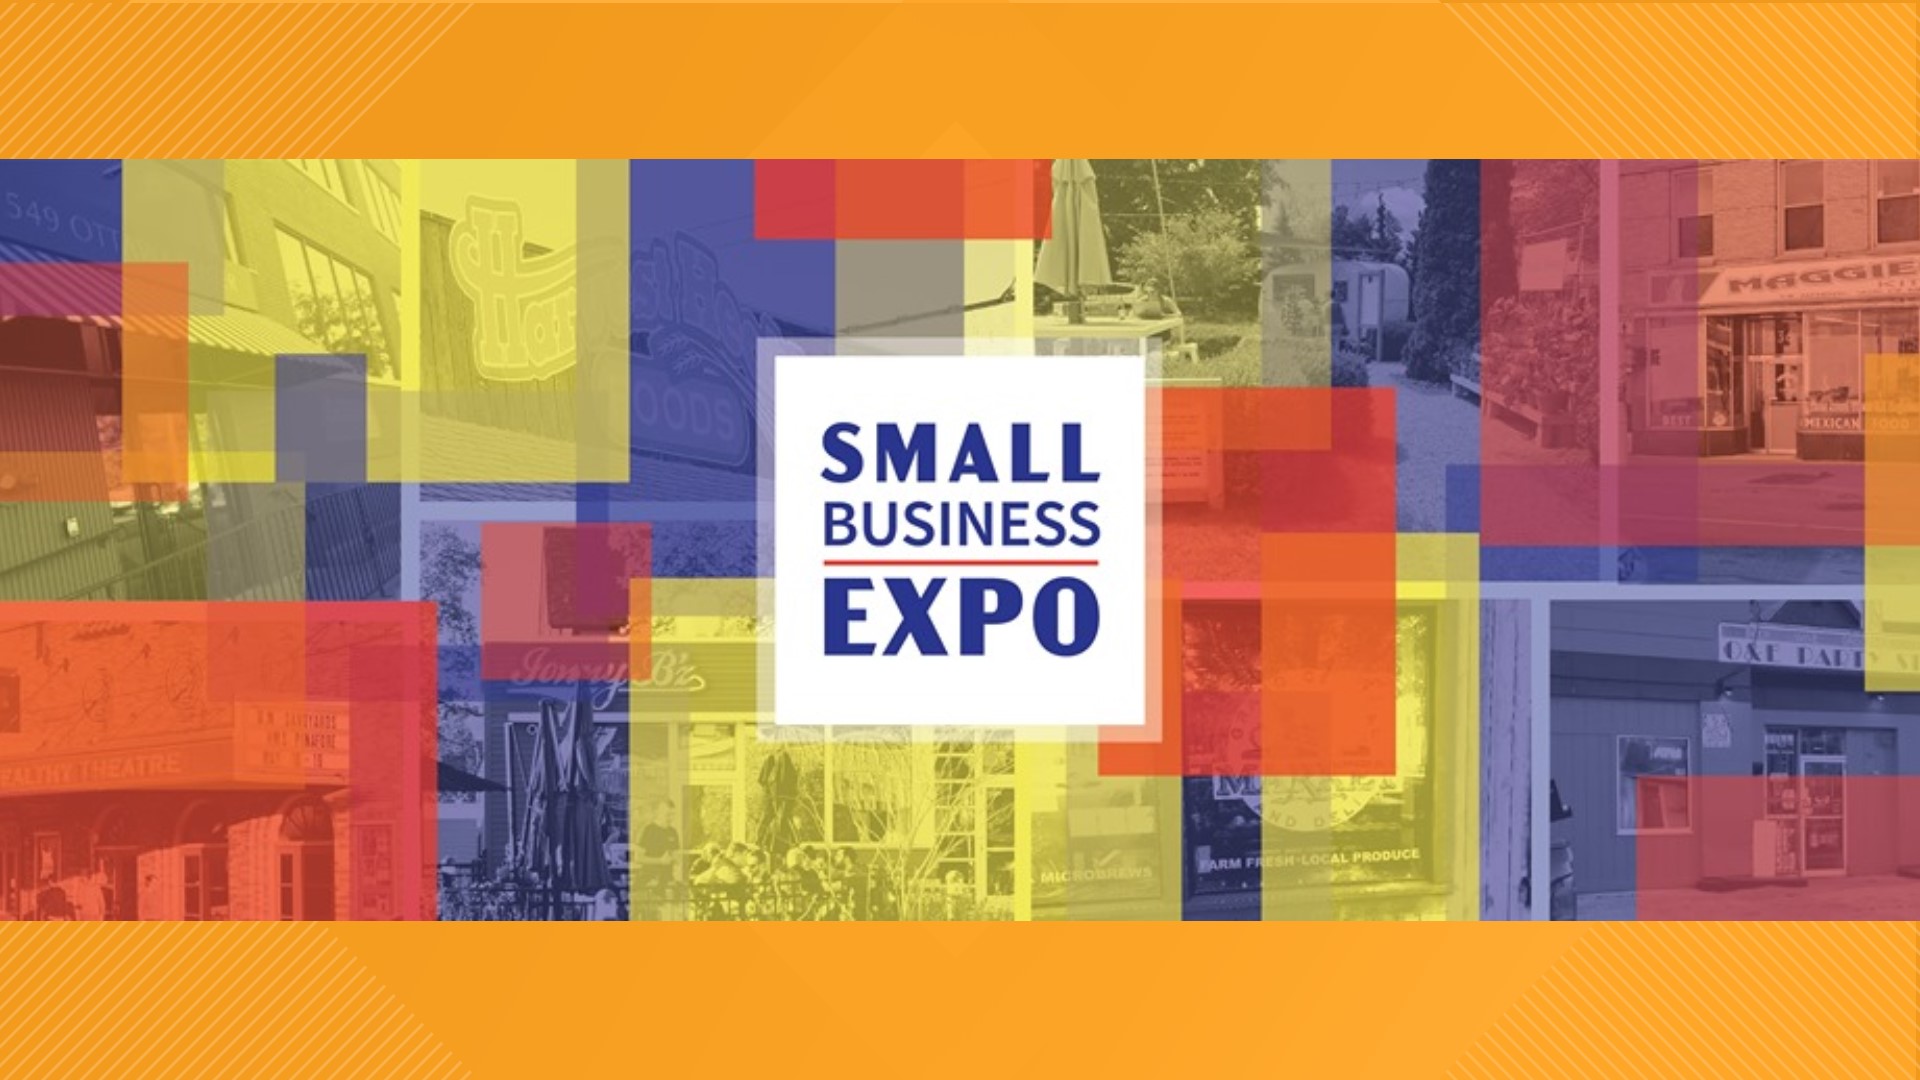 Small businesses get ready! The Small Business Expo is happening August 29 at DeVos Place in Grand Rapids. From 3 until 7 p.m. local business owners and managers can get connected with the resources they need to grow their business.